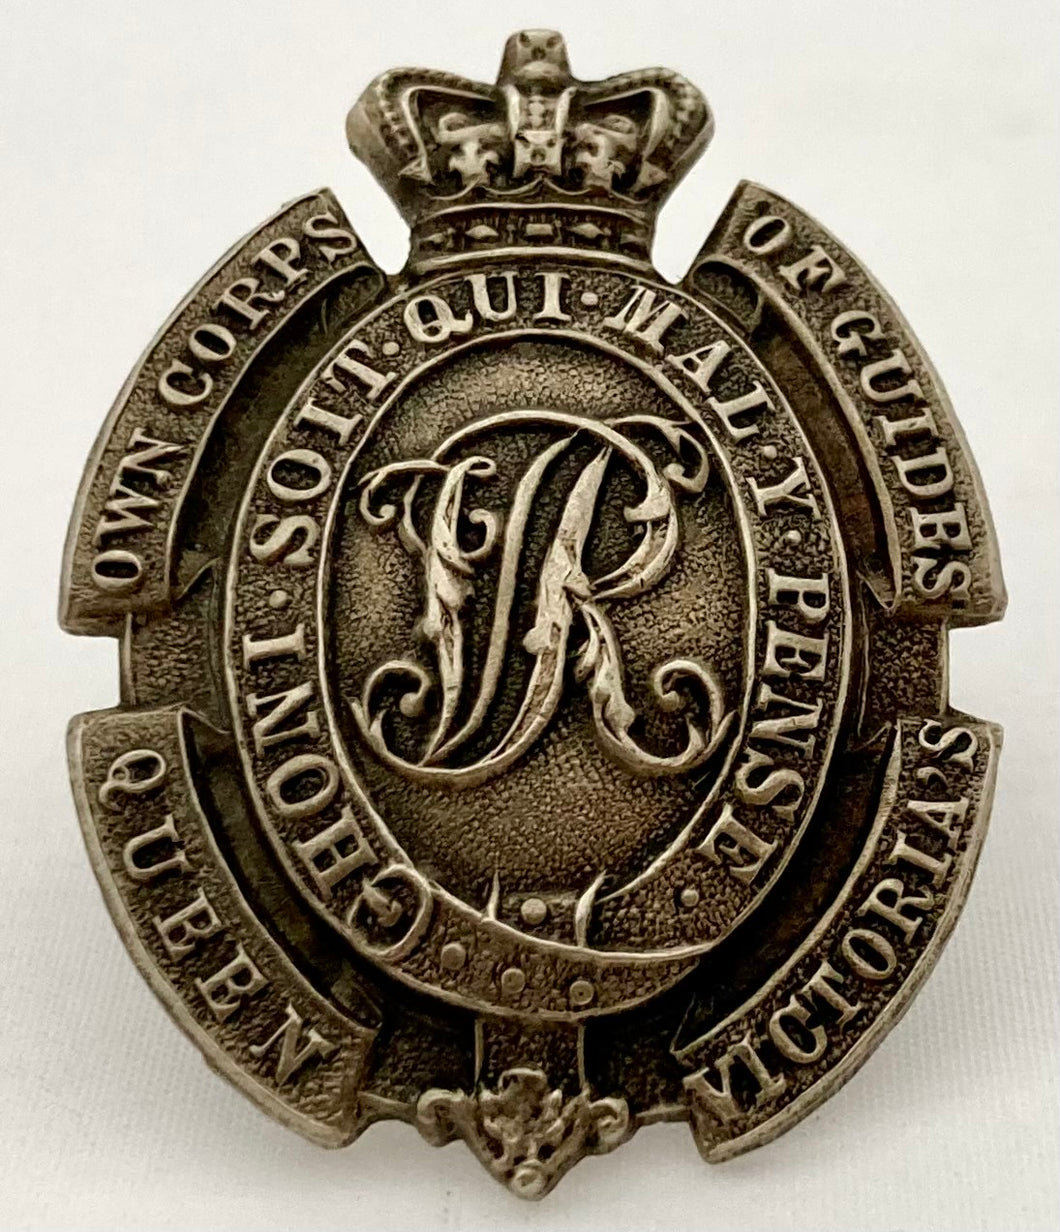 Queen Victoria's Own Corps of Guides (India) Cap Badge, 1902 - 1946.